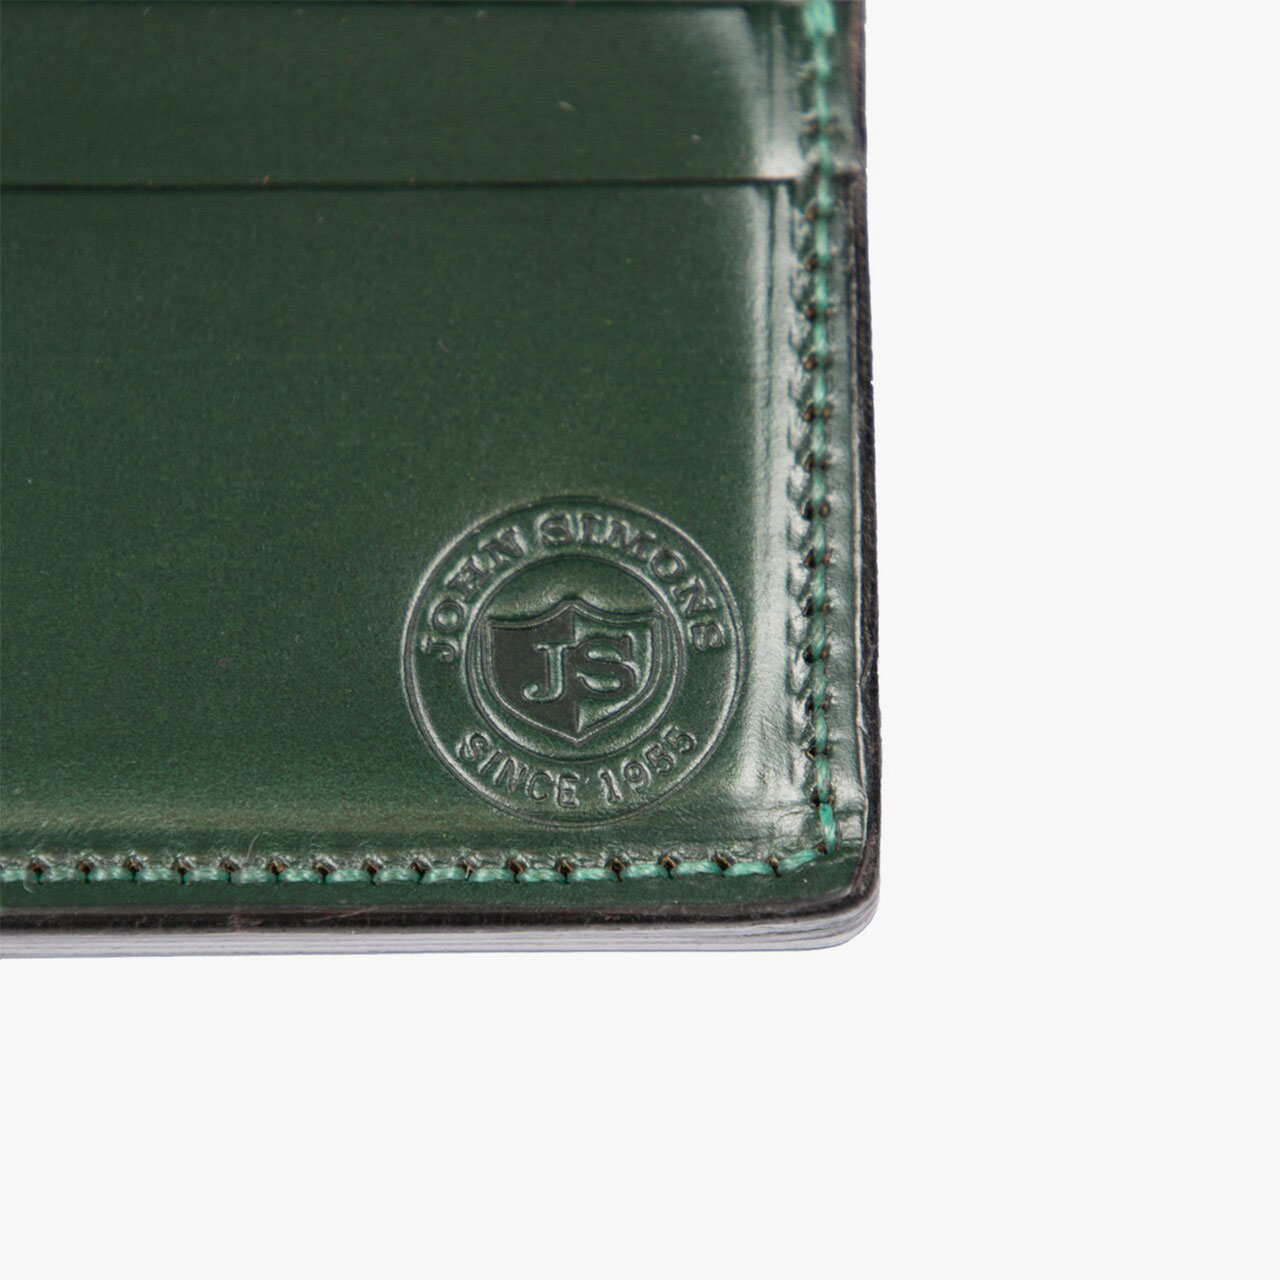 John Simons x McRostie Limited Edition Green Leather Card Holder